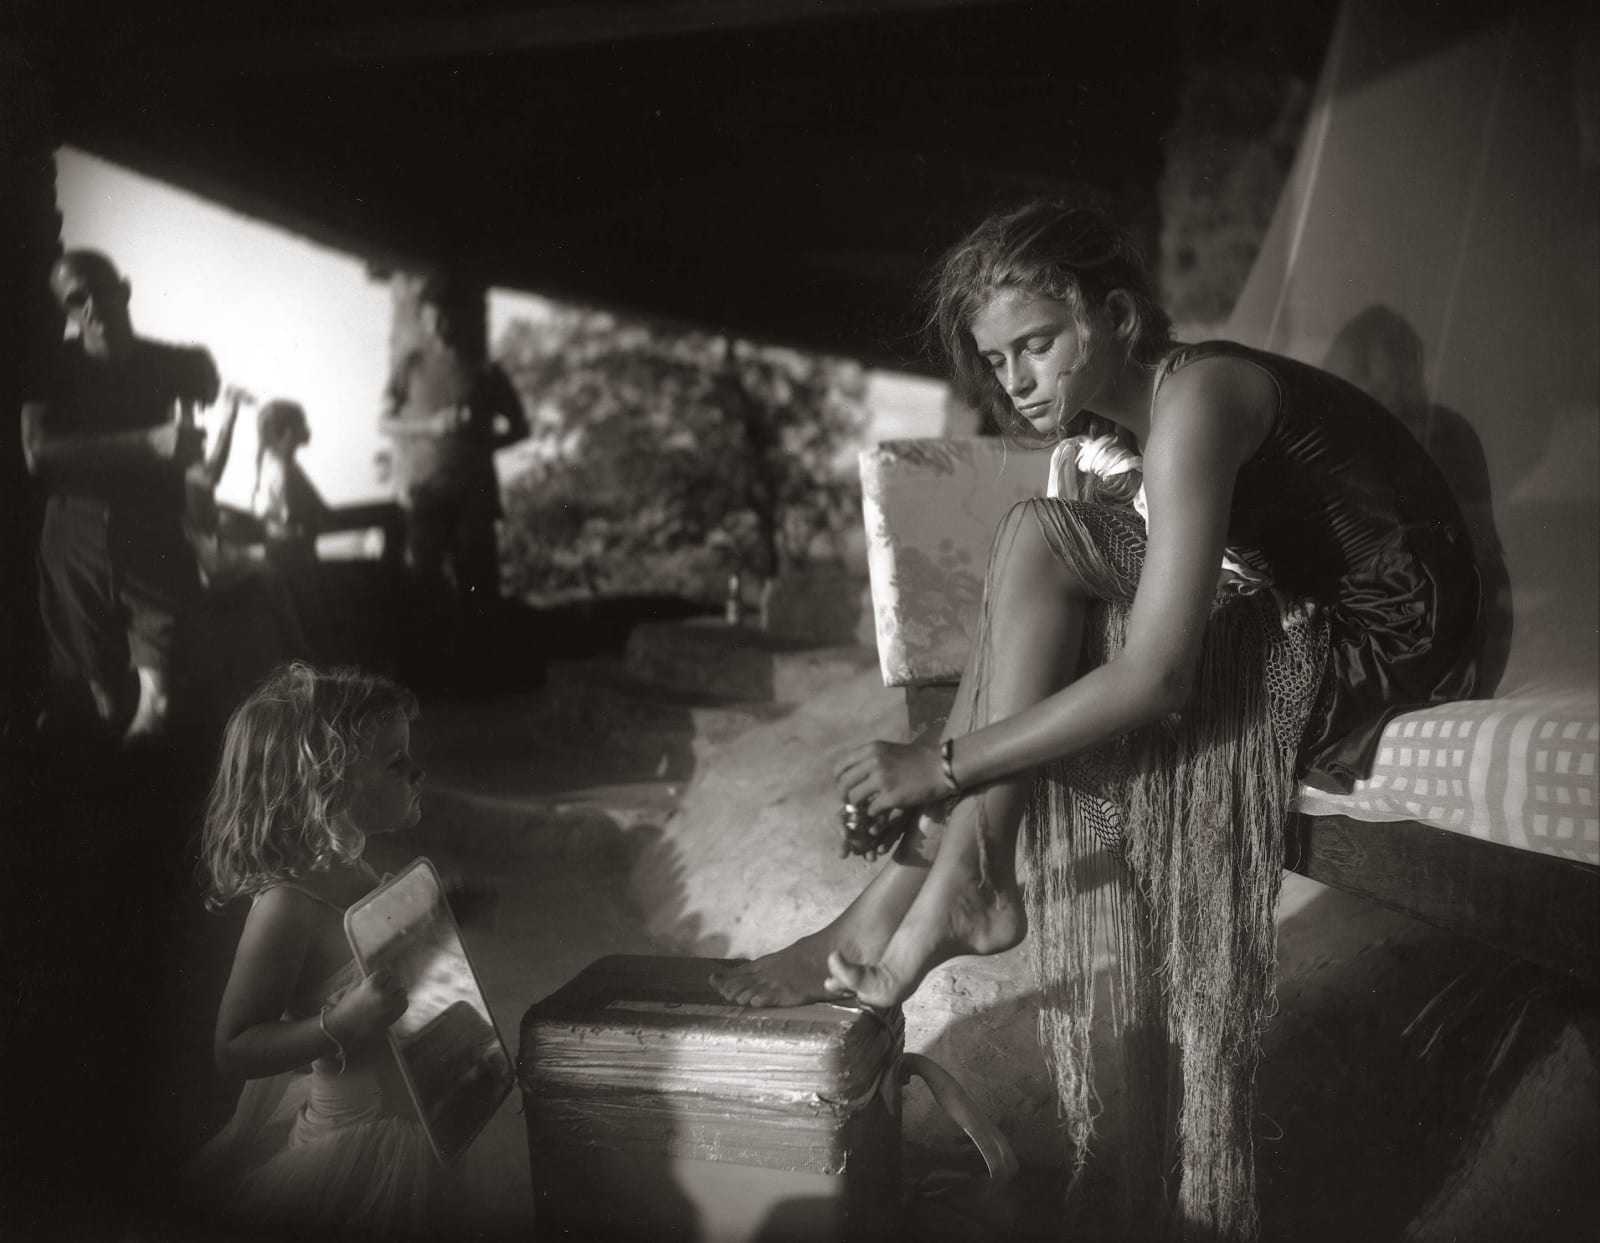 The Virtuous Girl, Jessie sitting down while Virginia holds mirror for her, from the Immediate Family series by Sally Mann